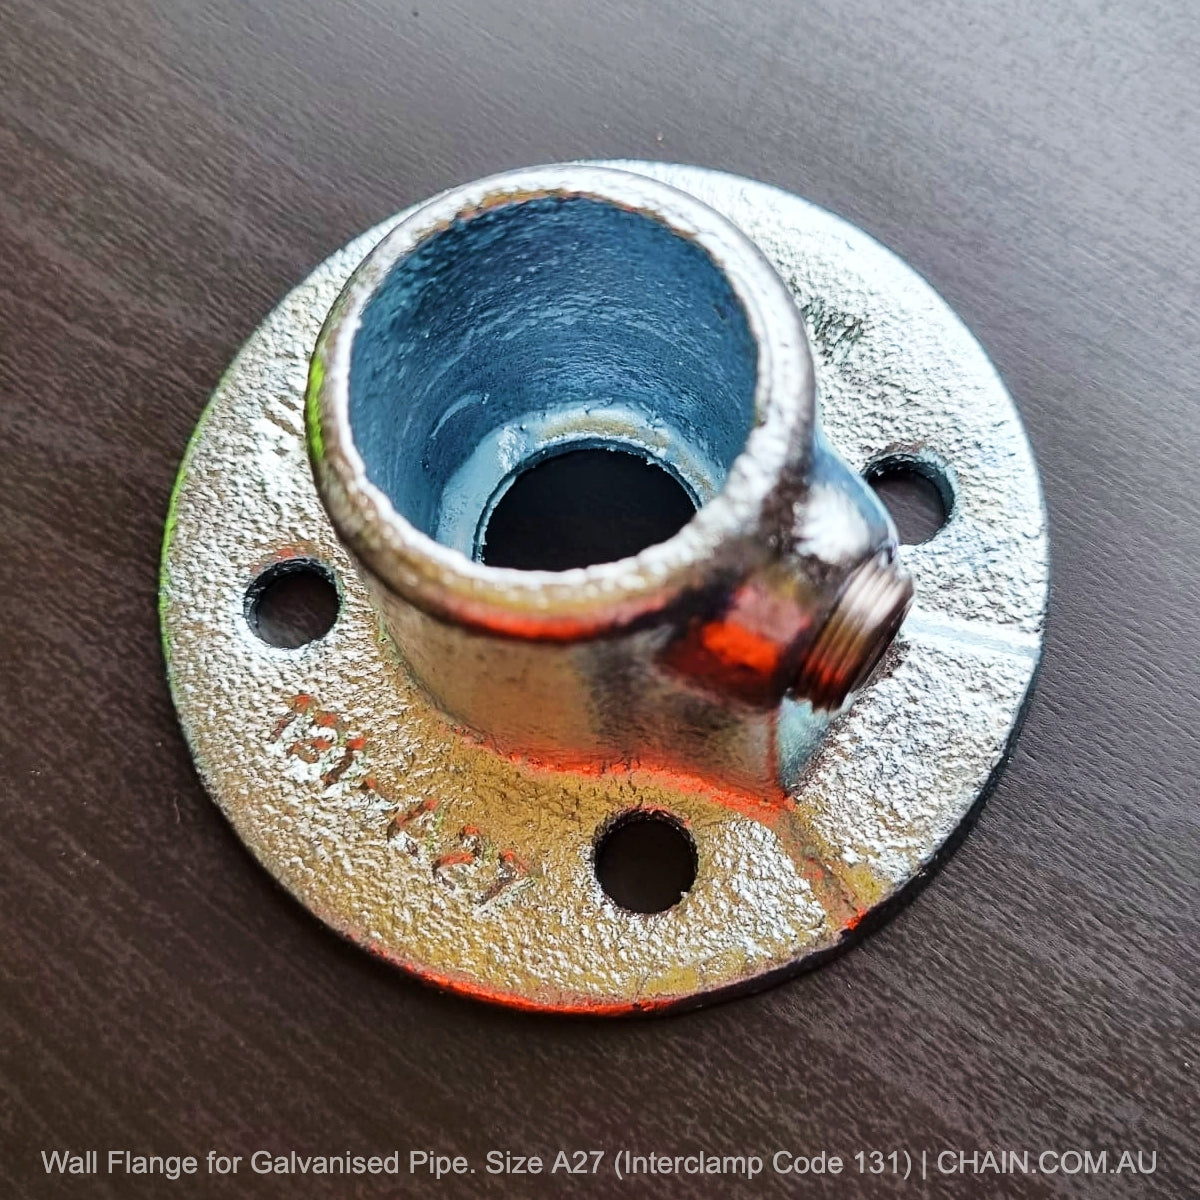 Wall Flange for Galvanised Pipe. Size A27. Shop Interclamp Rail & Pipe Fittings online at chain.com.au. Australia wide shipping.